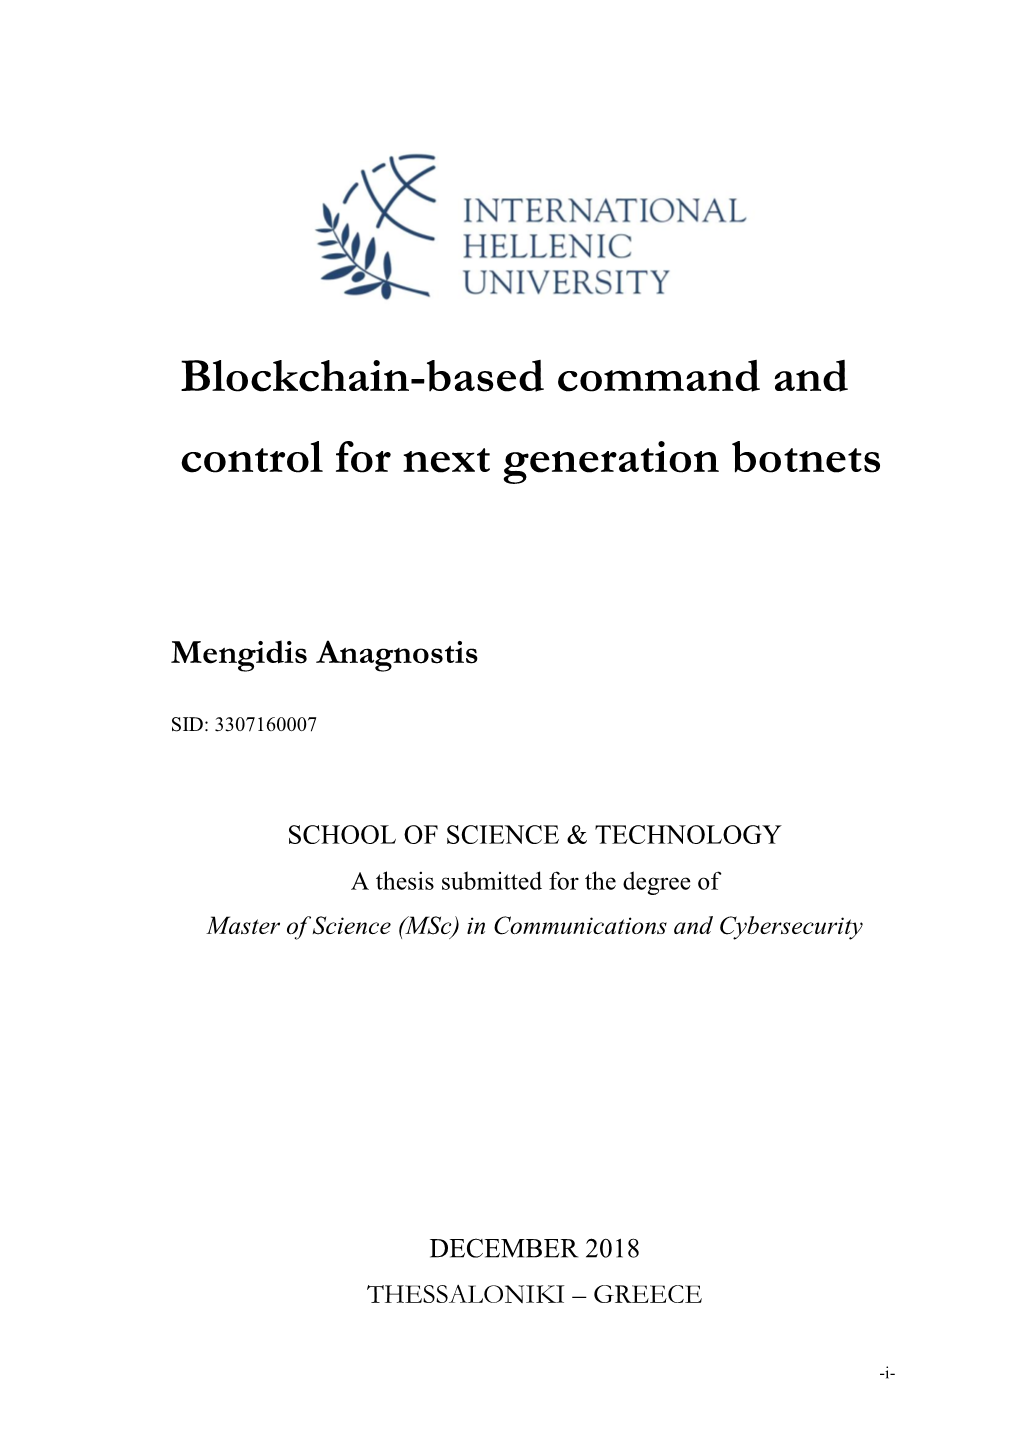 Blockchain-Based Command and Control for Next Generation Botnets